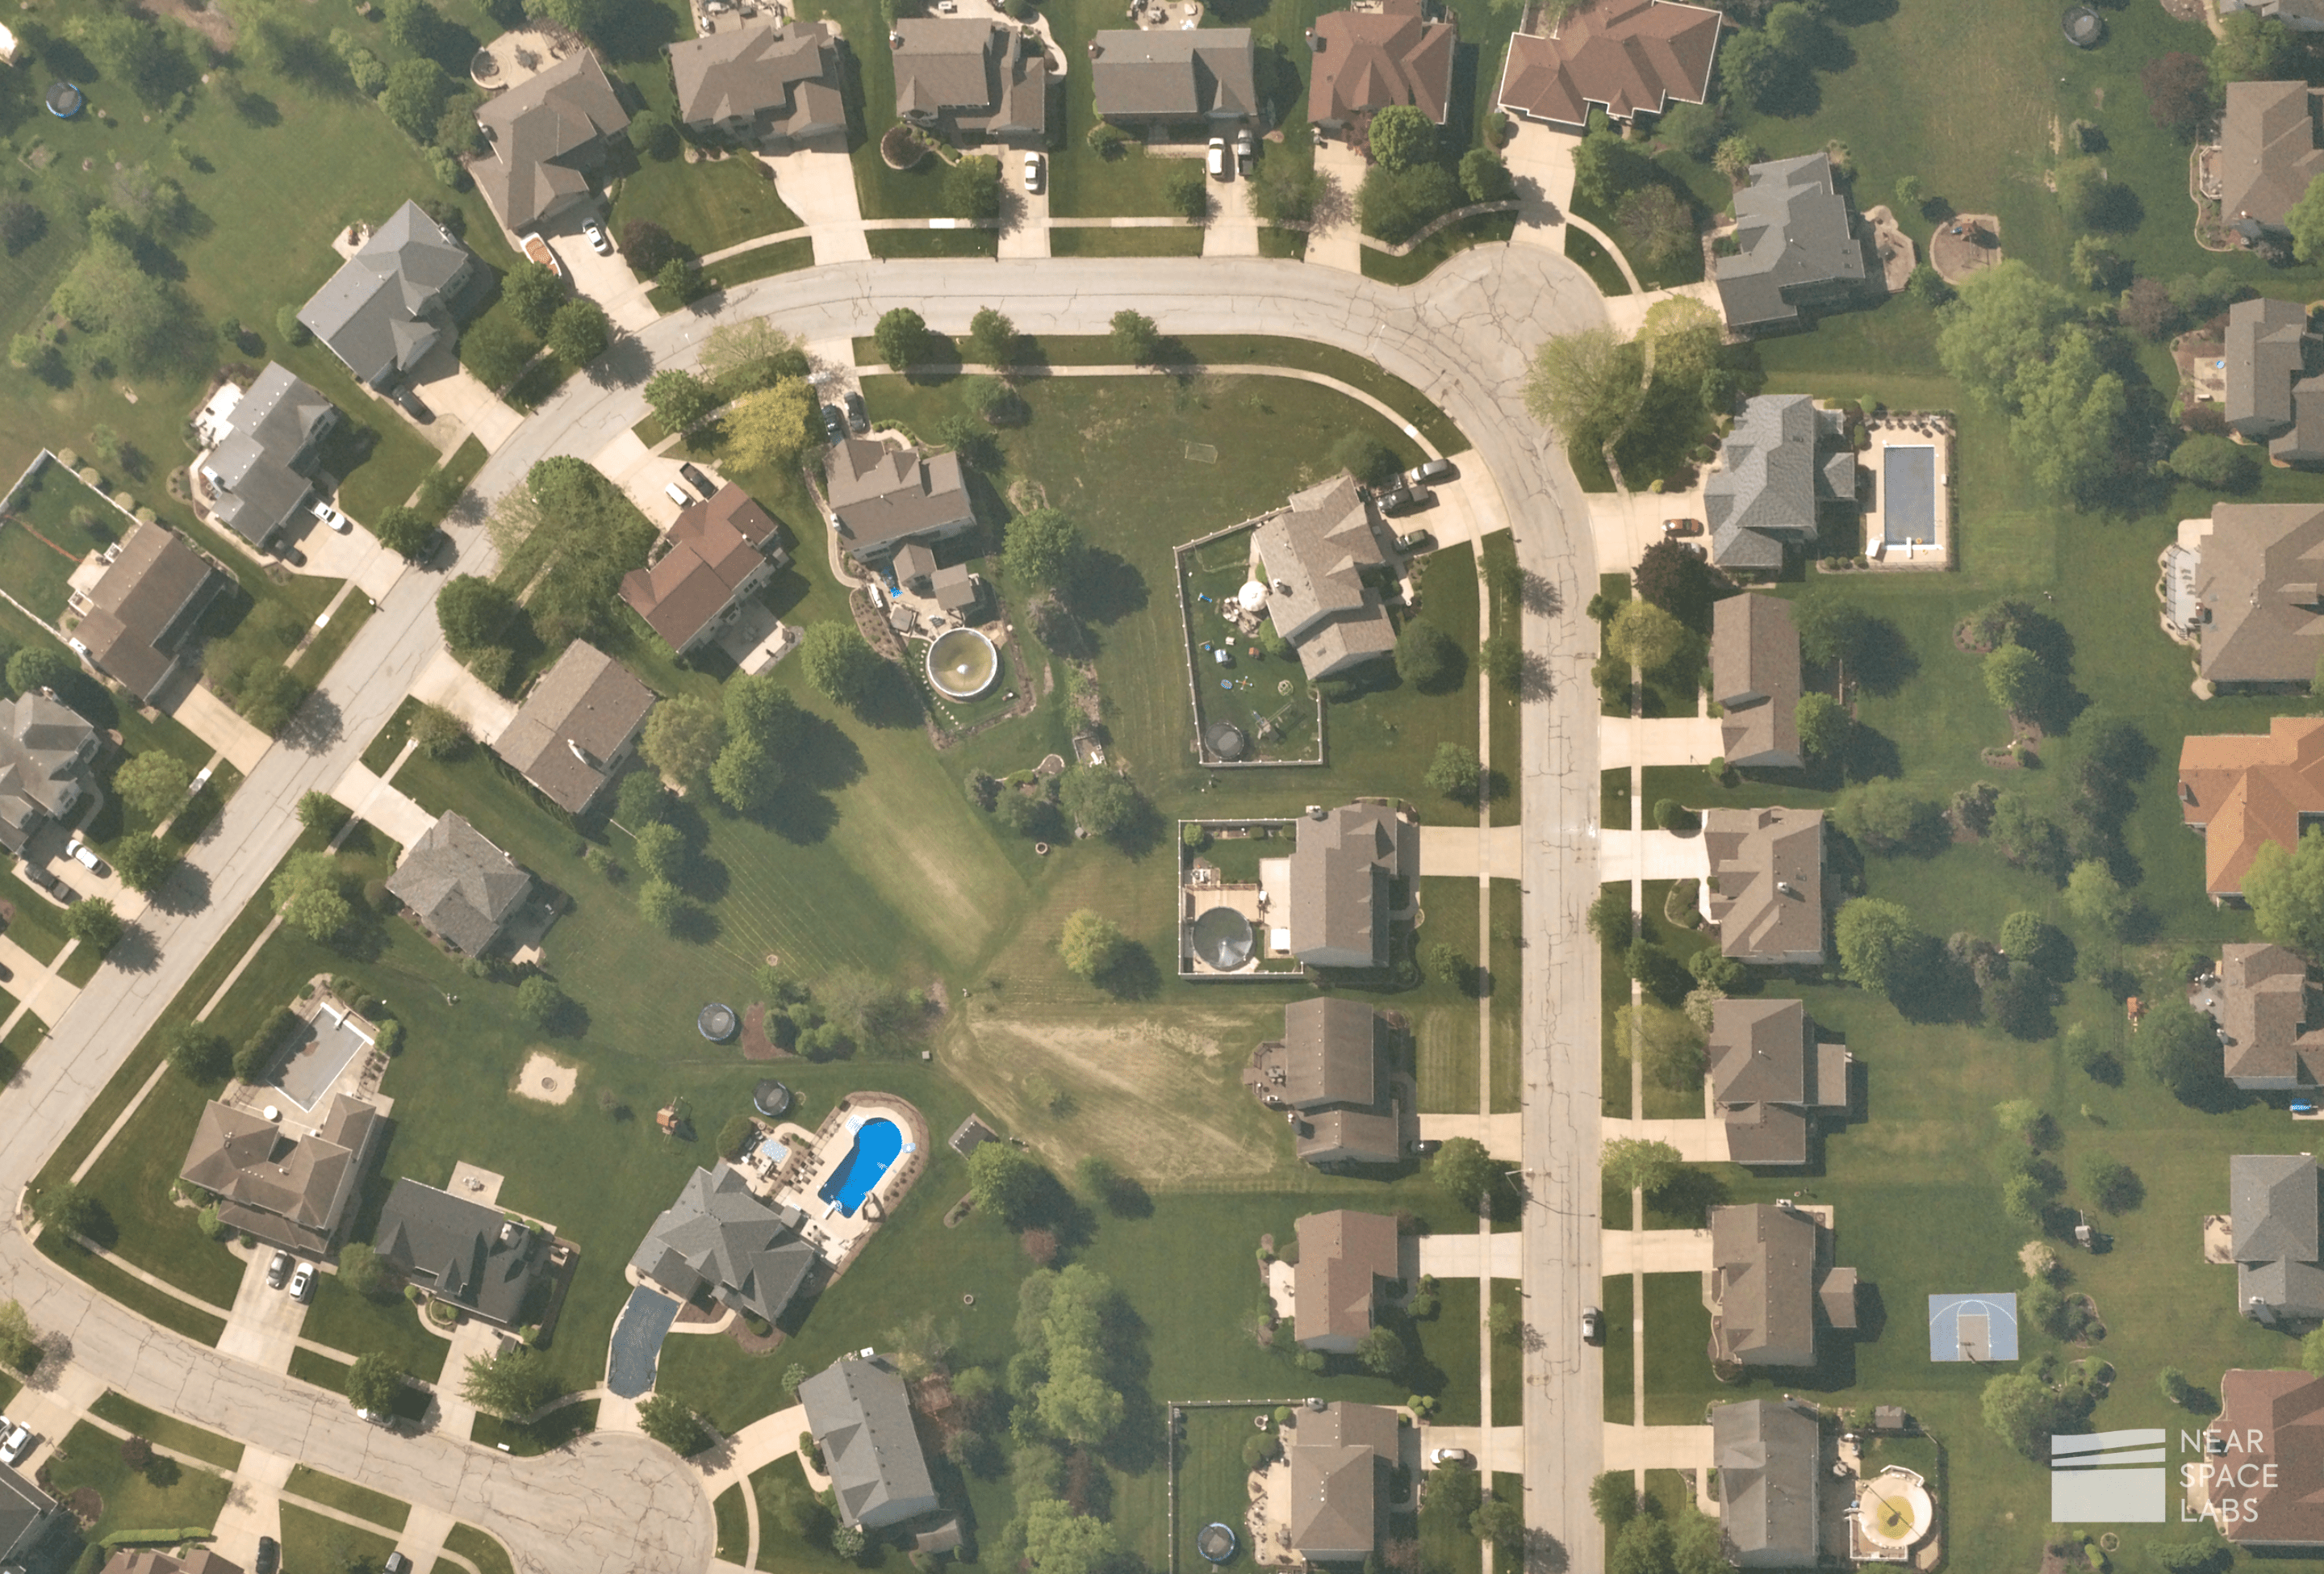 Residential community showcasing alligator cracking in roads, swimming pools, outside furniture, and surrounding landscapes.